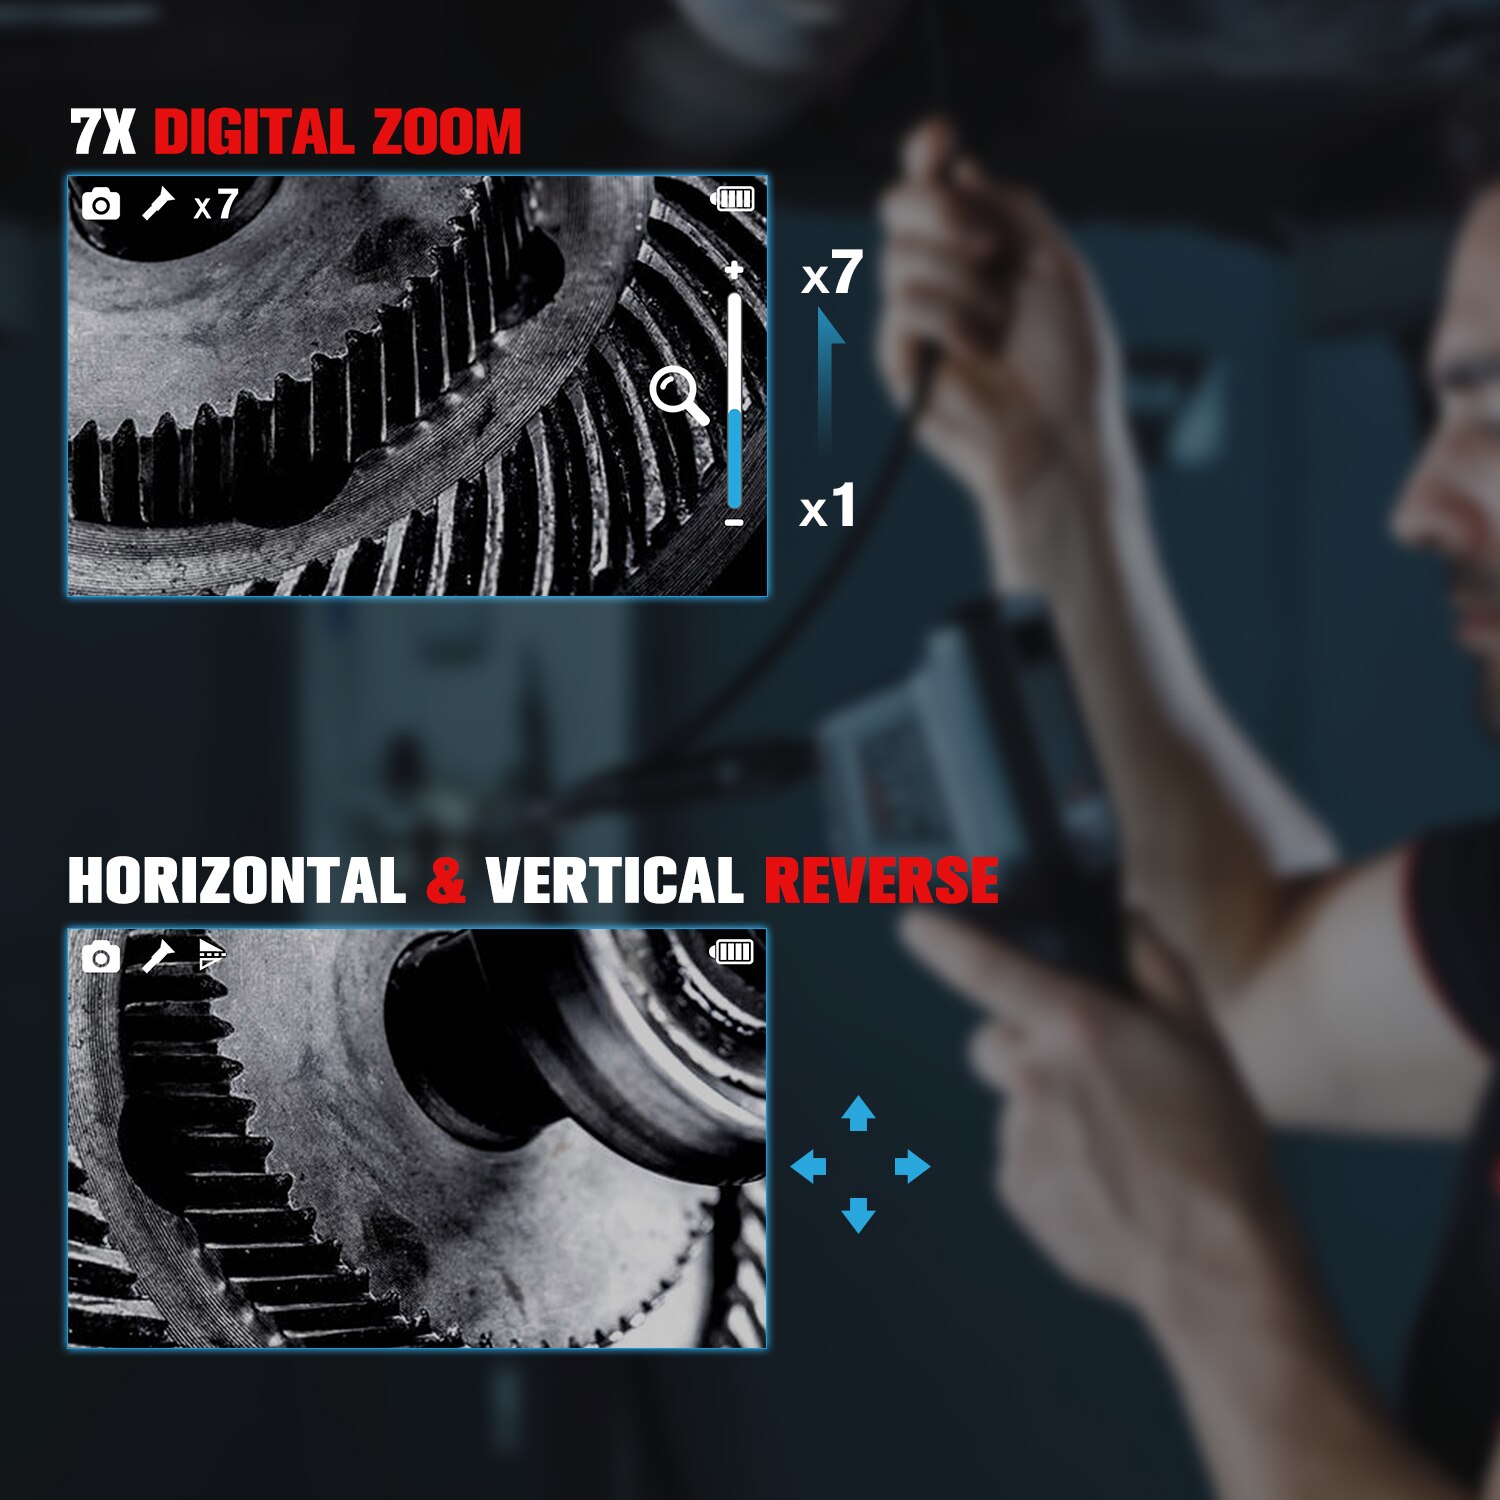 Autel MV480 Industrial Endoscope/Borescope,Dual Lens 8.5mm Inspection Camera with 7X Zoom,2MP,a Waterproof Cable,for Car/Wall